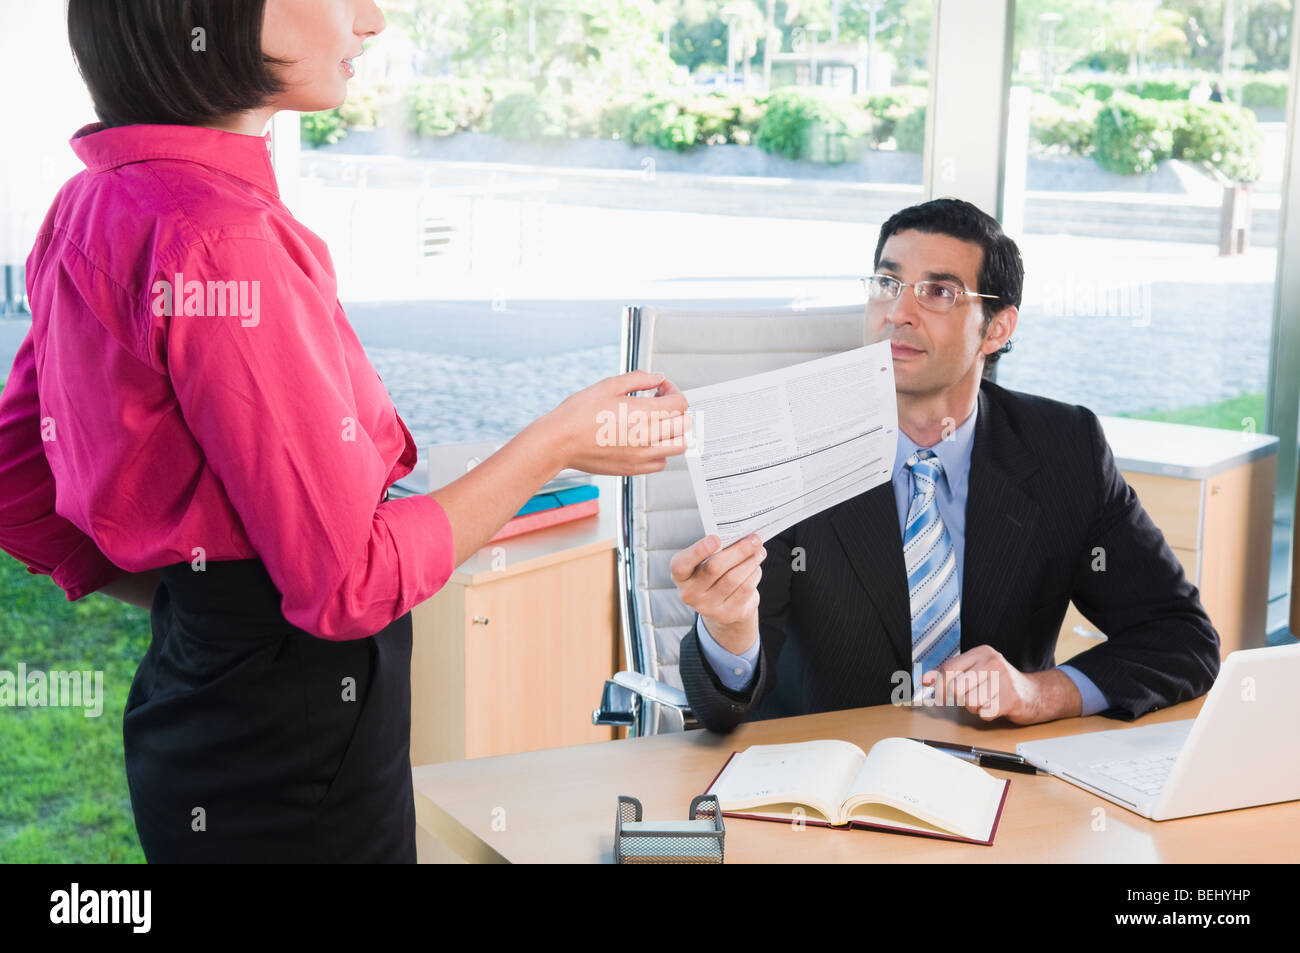 business executives working in an office Stock Photo